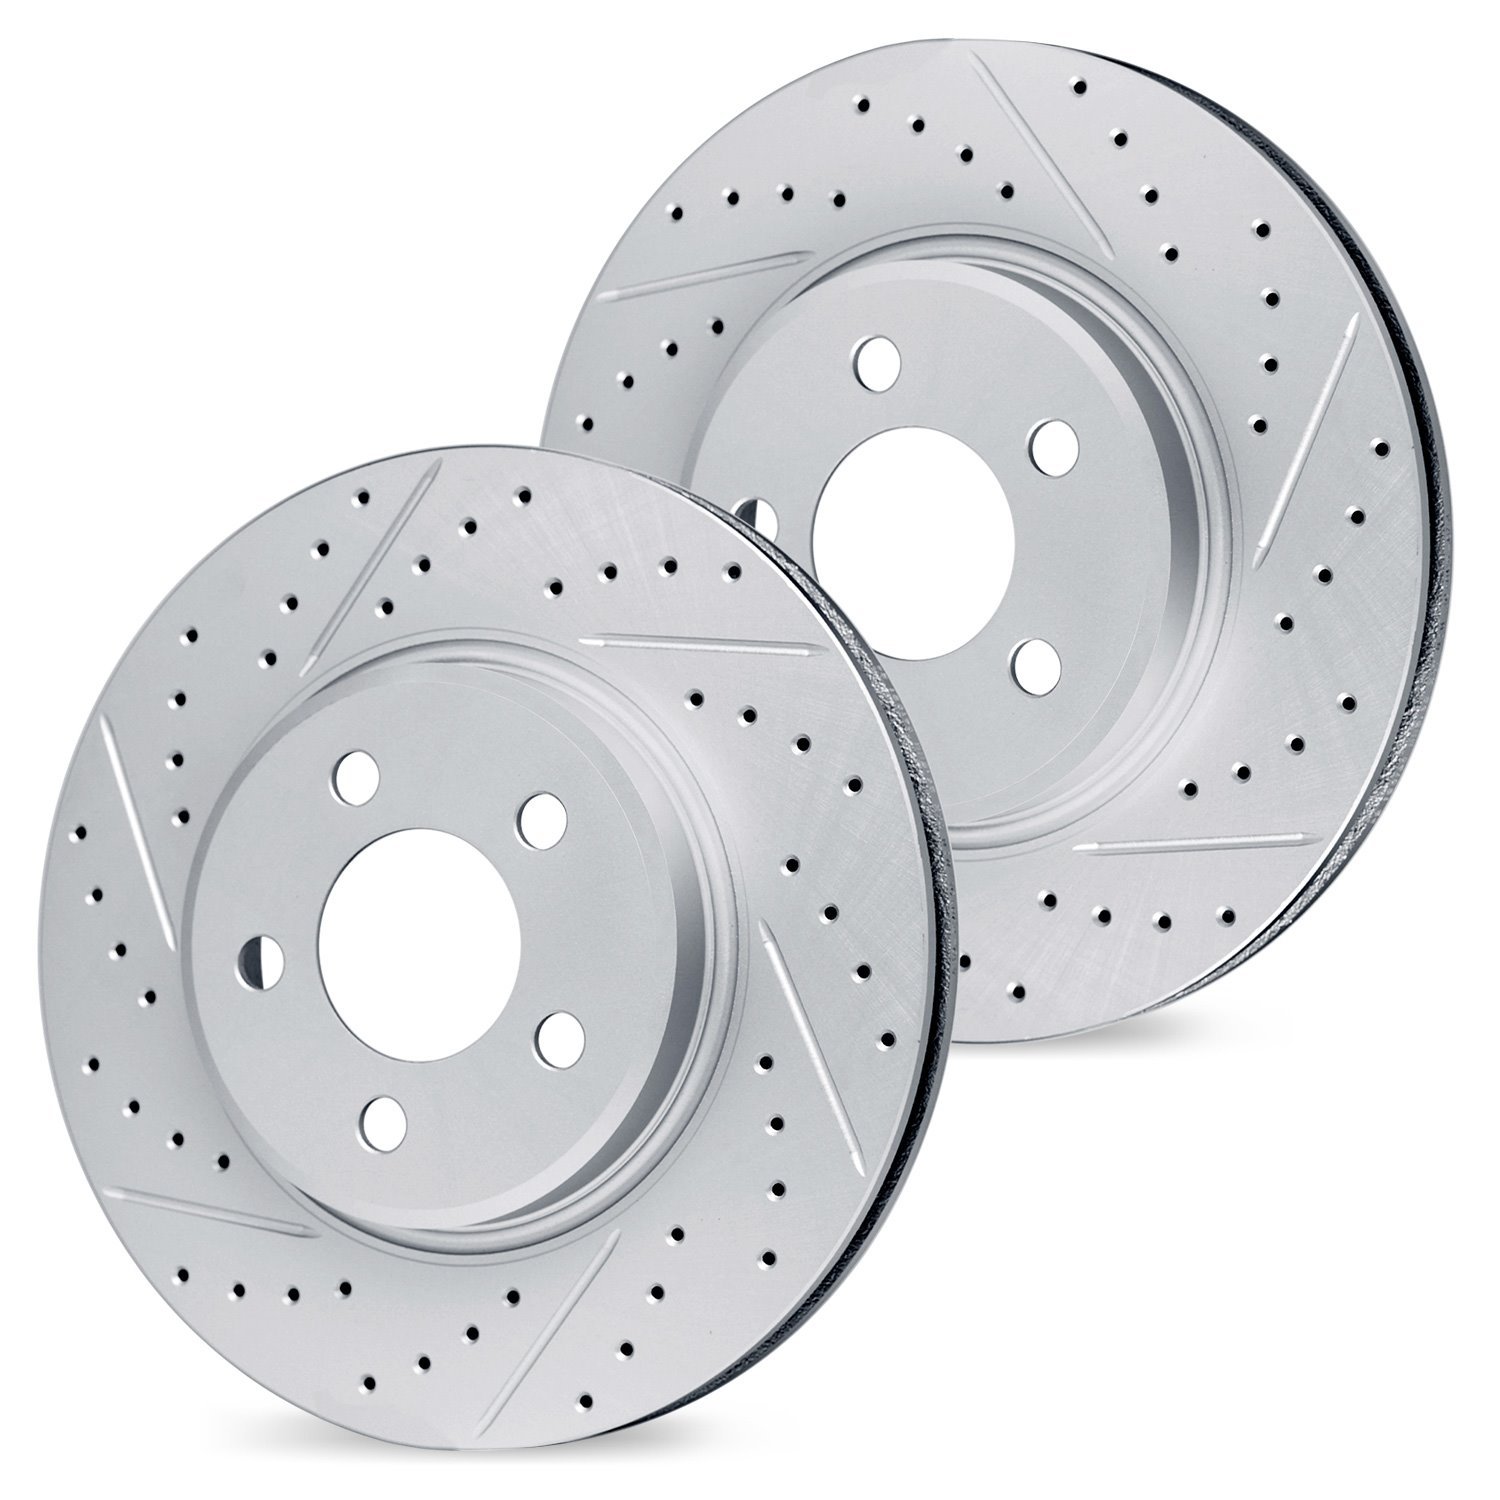 GEO-Carbon Drilled & Slotted Brake Rotor Set, Fits Select Acura/Honda, Position: Front & Rear